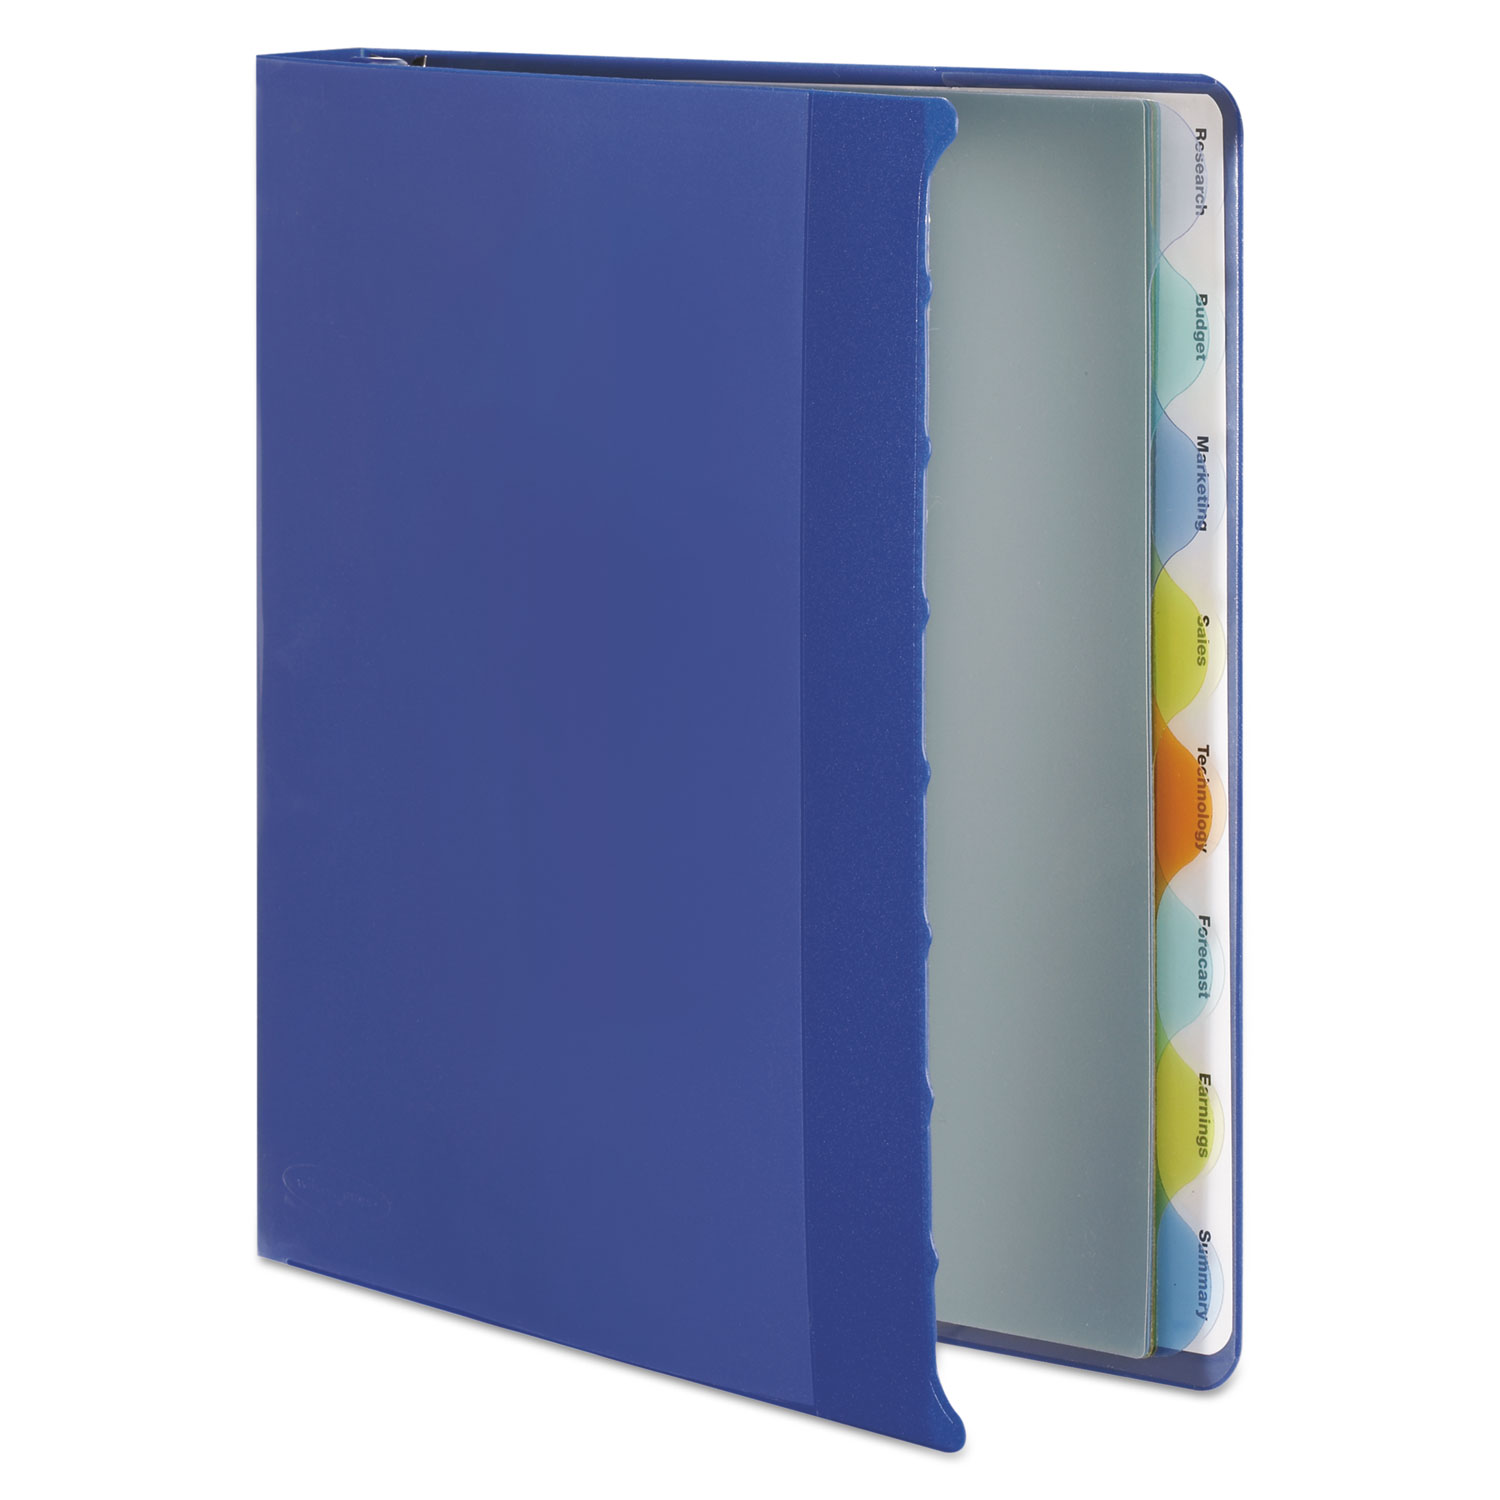 View-Tab Presentation Round Ring View Binder With Tabs, 3 Rings, 1